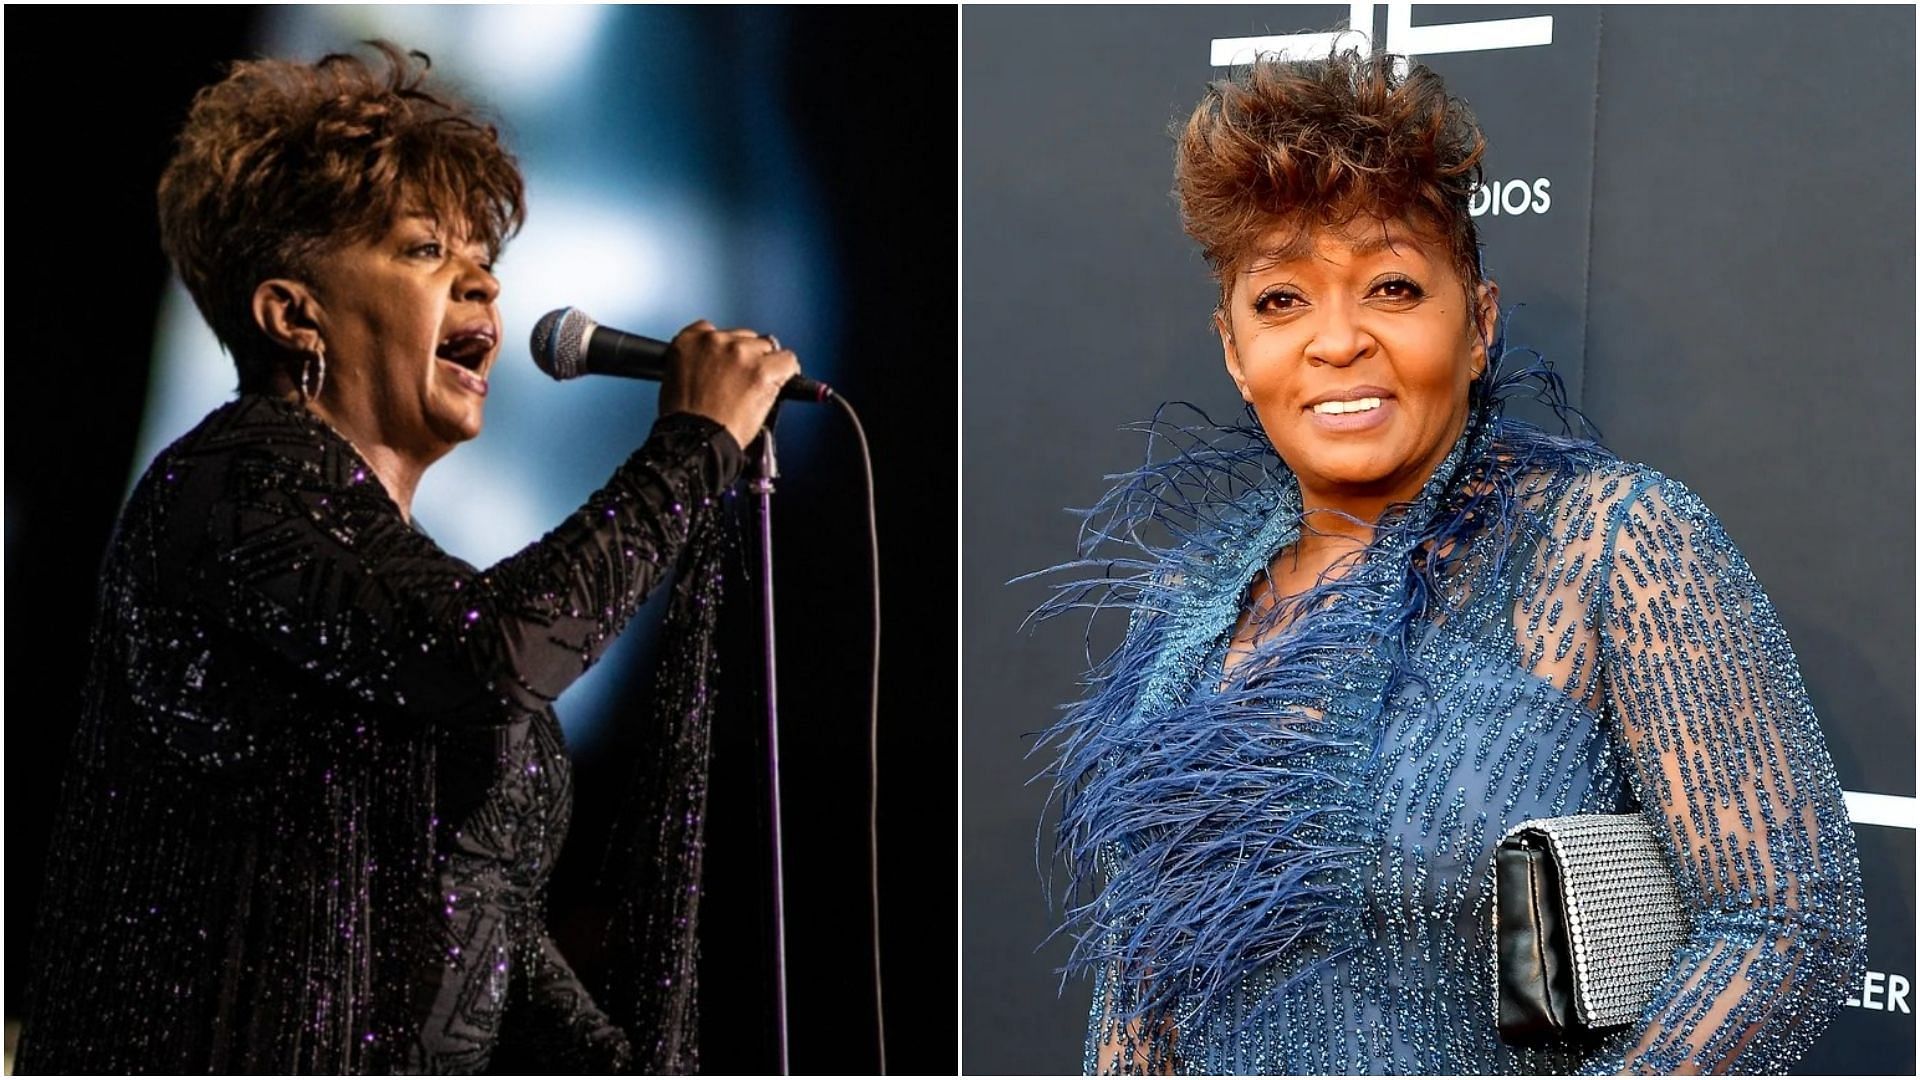 Anita Baker Tour 2023 Tickets, where to buy, dates, venues, and more